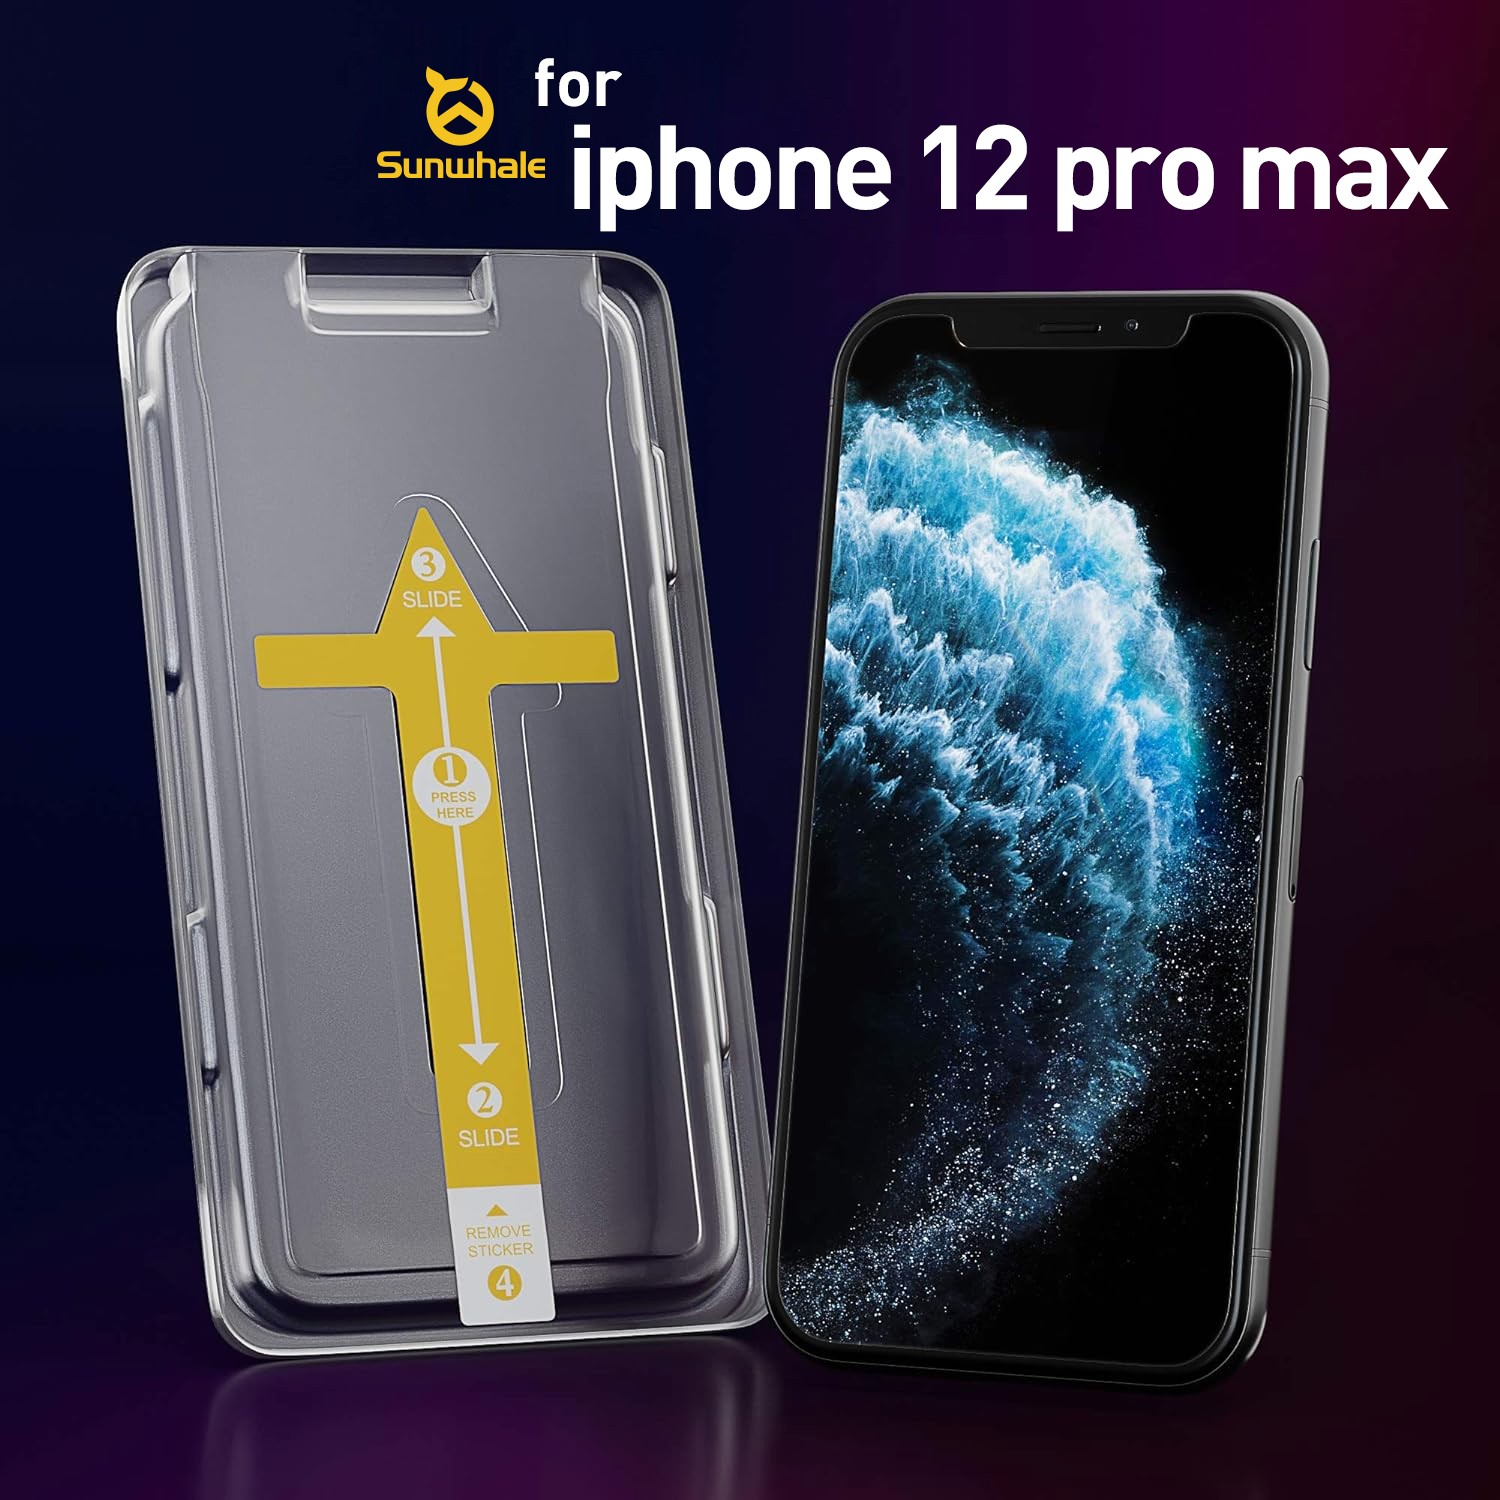 Mobile-Phone-Accessories-Sunwhale-for-iPhone-12-pro-max-Screen-Protector-Auto-Alignment-Kit-38